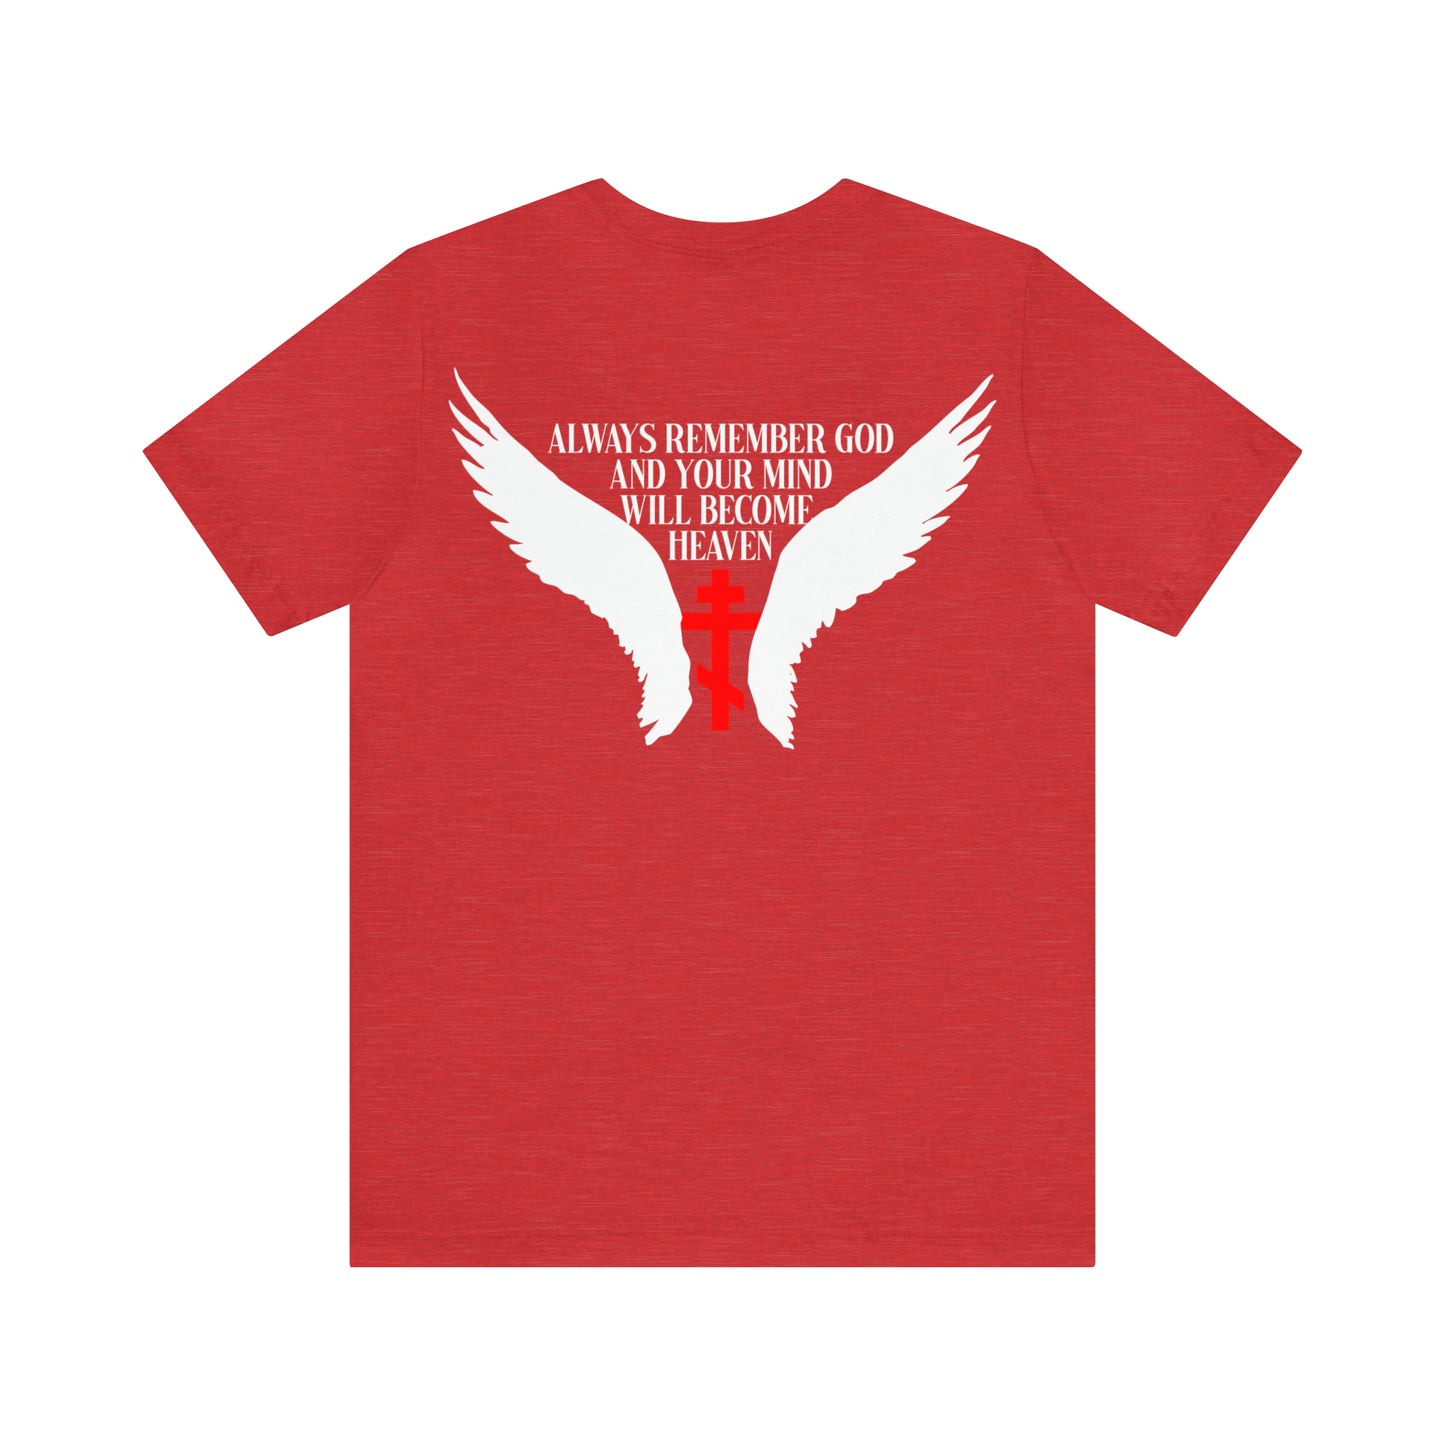 It's Later Than You Think No. 3 Split W/ Always Remember God and Your Mind Will Become Heaven No. 1 | Orthodox Christian T-Shirt